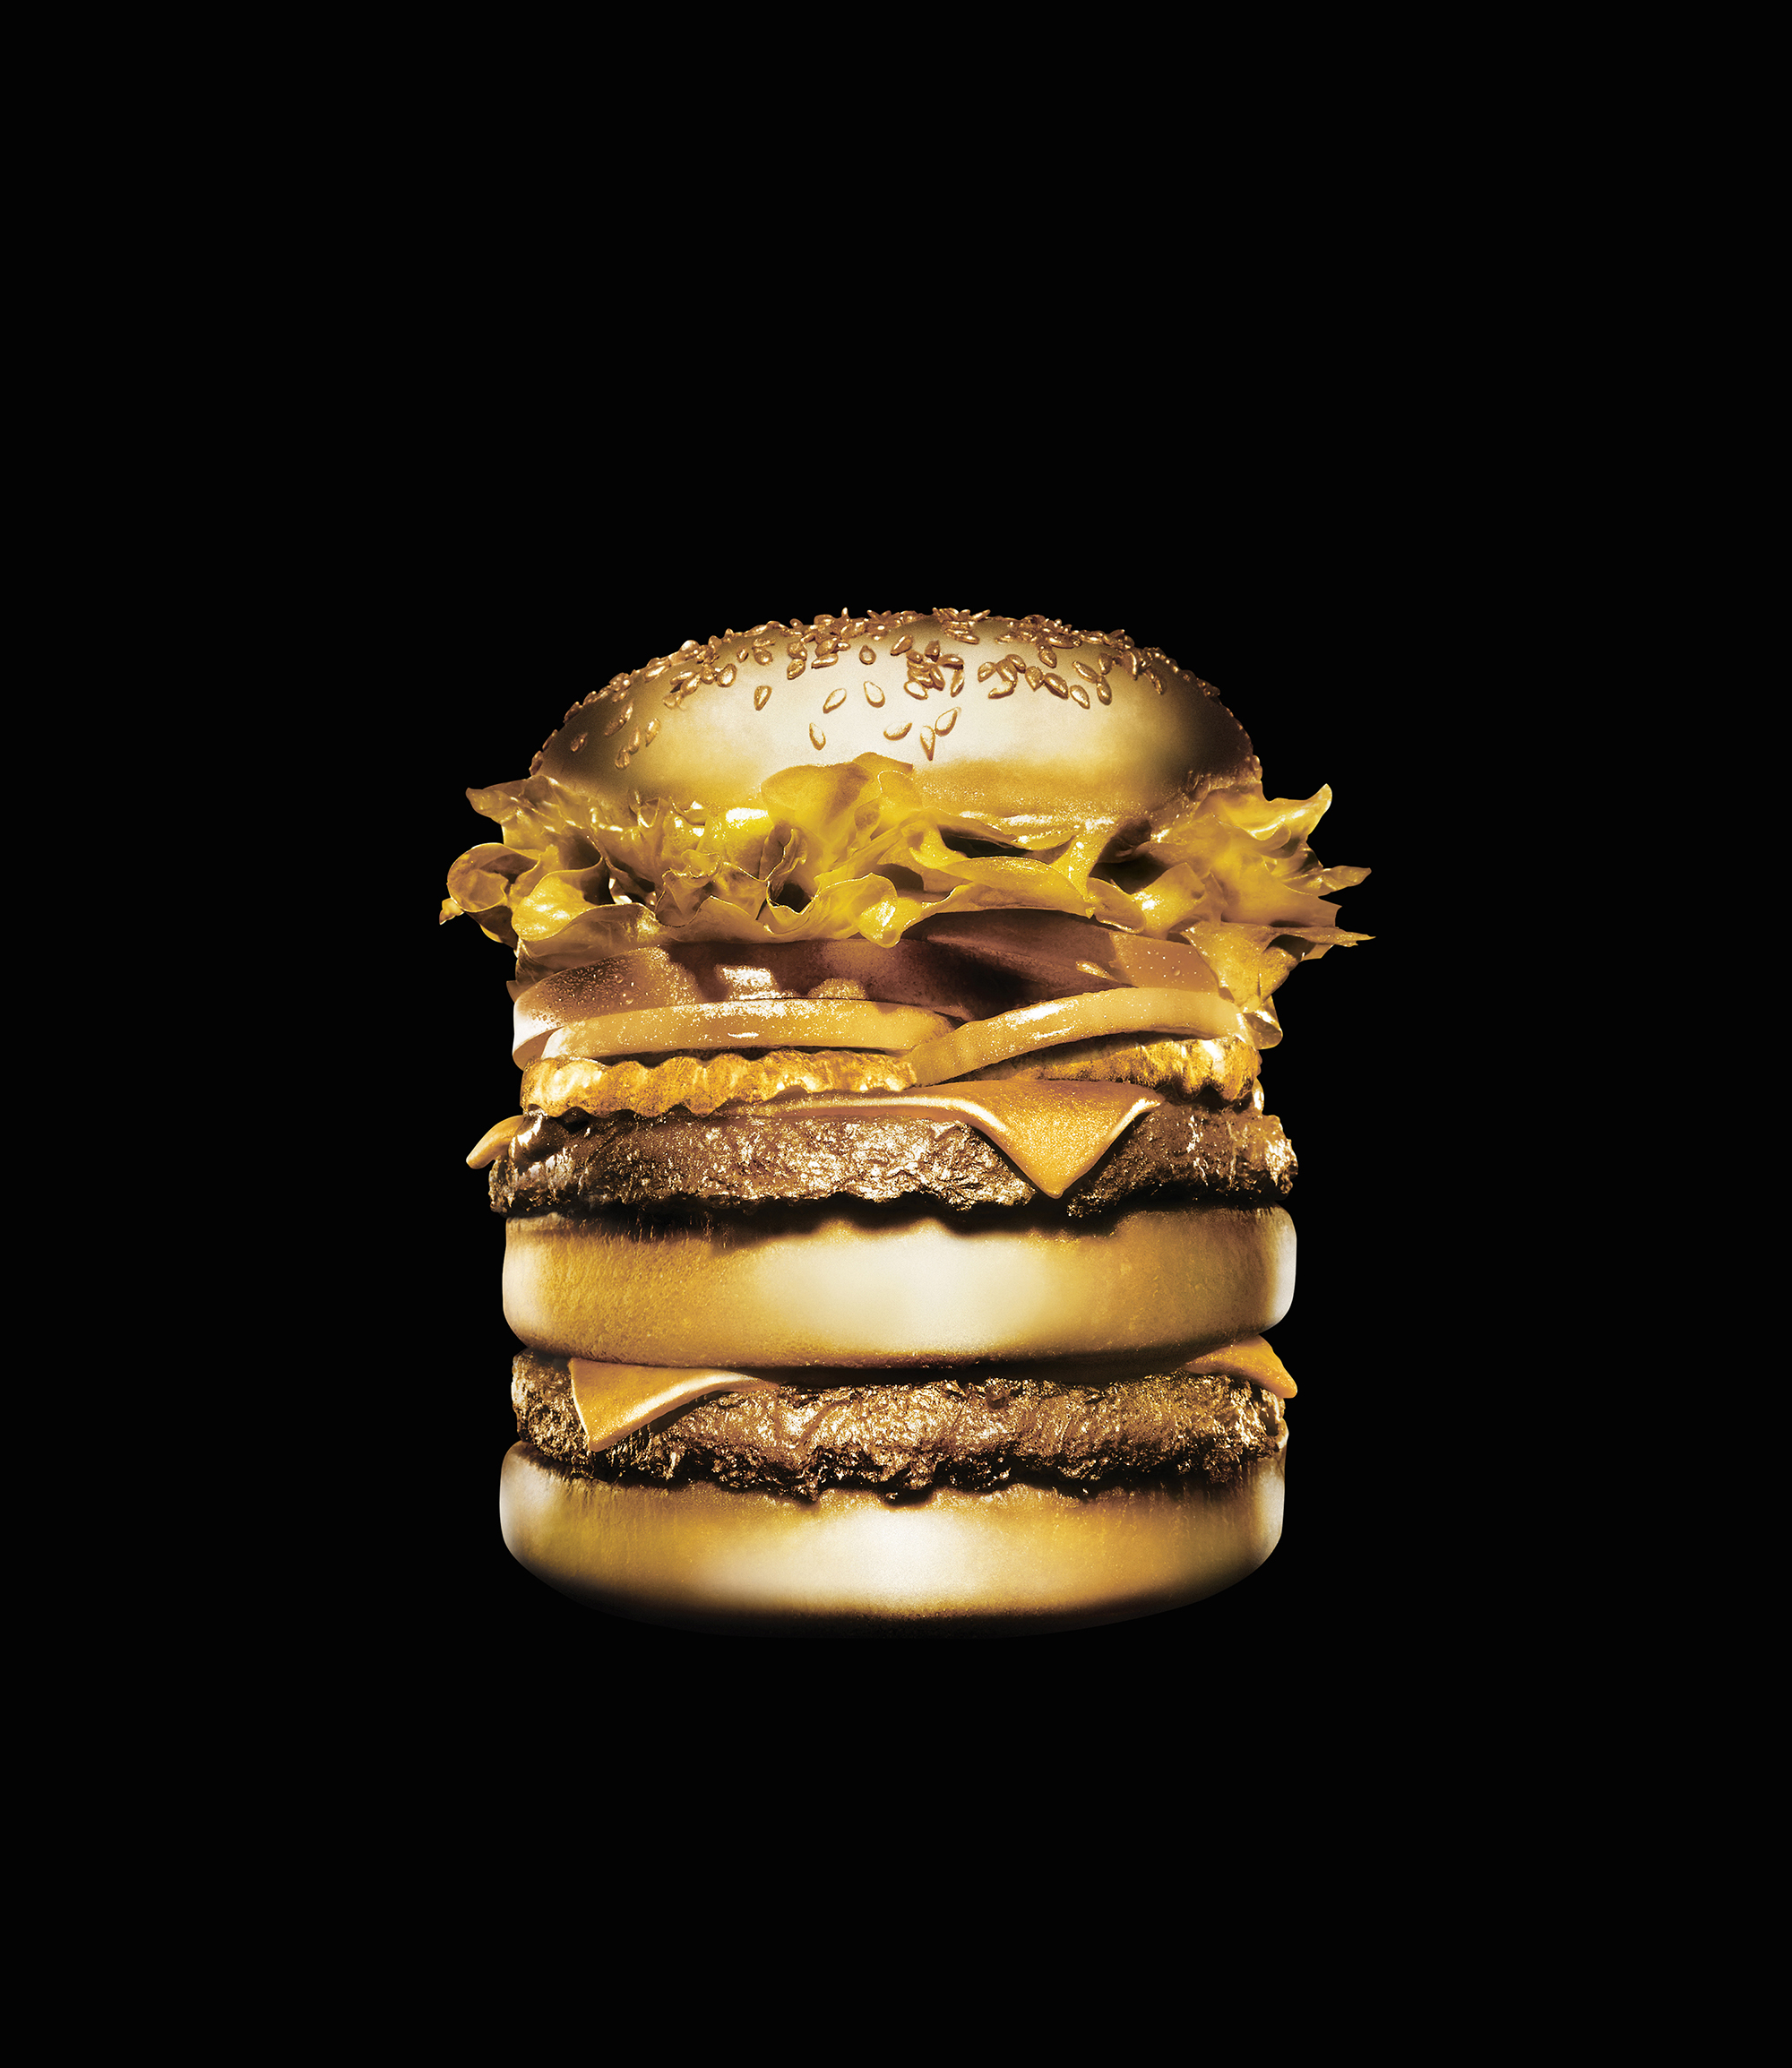 Conceptual still life of a gilded gold hamburger isolated on a black background